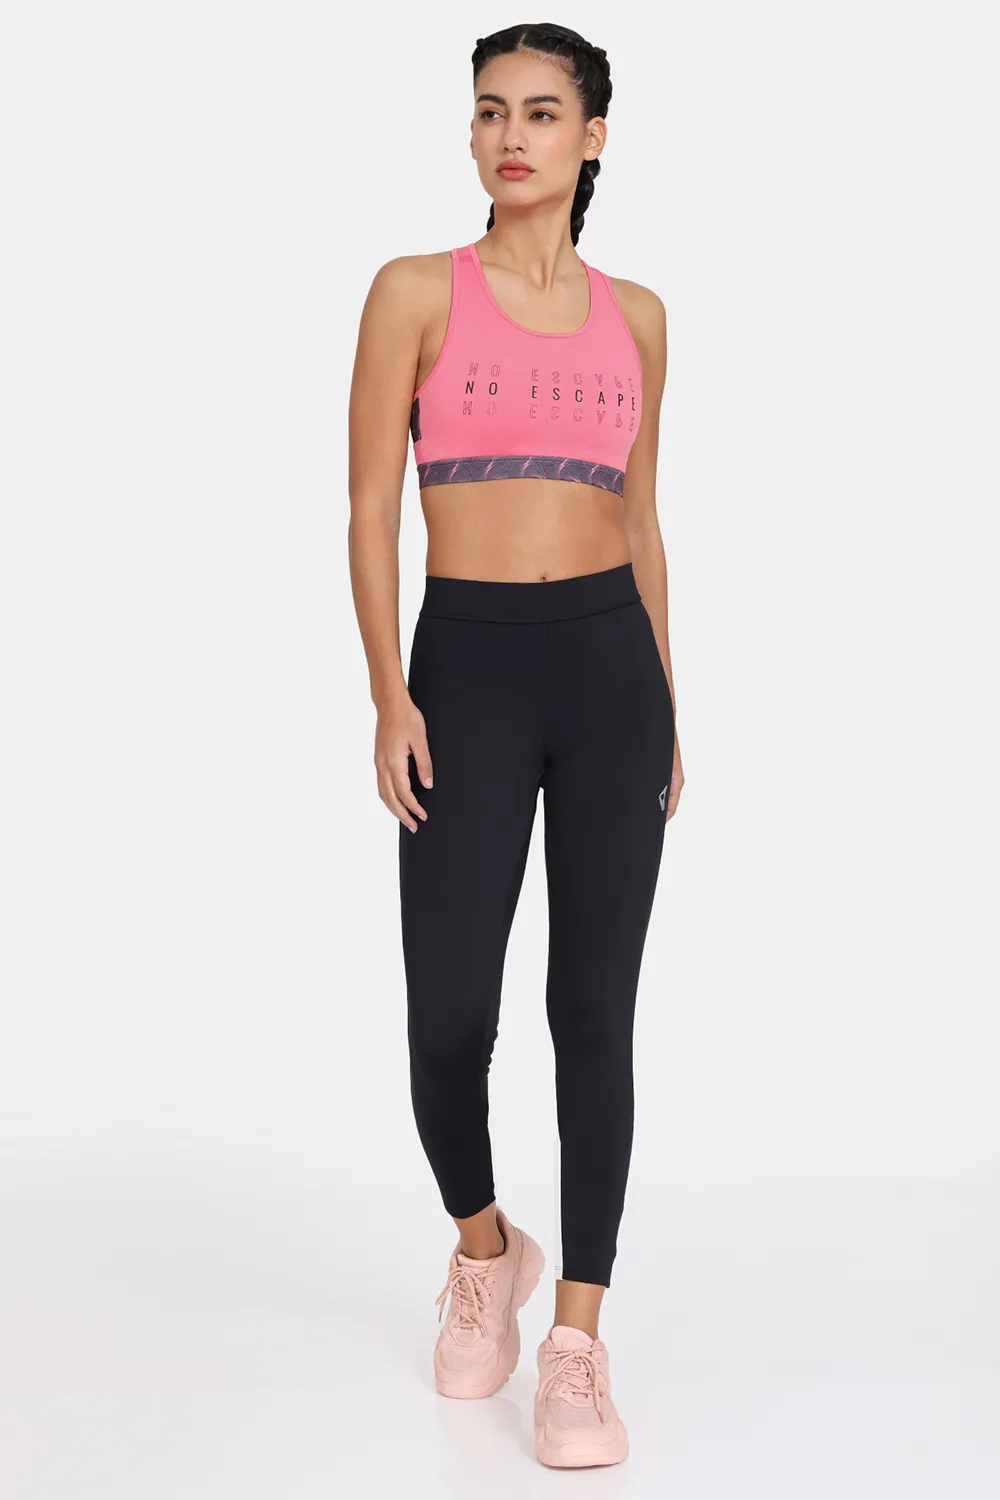 https://cdn.zivame.com/ik-seo/media/catalog/product/1/_/1_69_33/zelocity-quick-dry-removable-padding-sports-bra-with-mid-rise-leggings-coral-anthracite.jpg